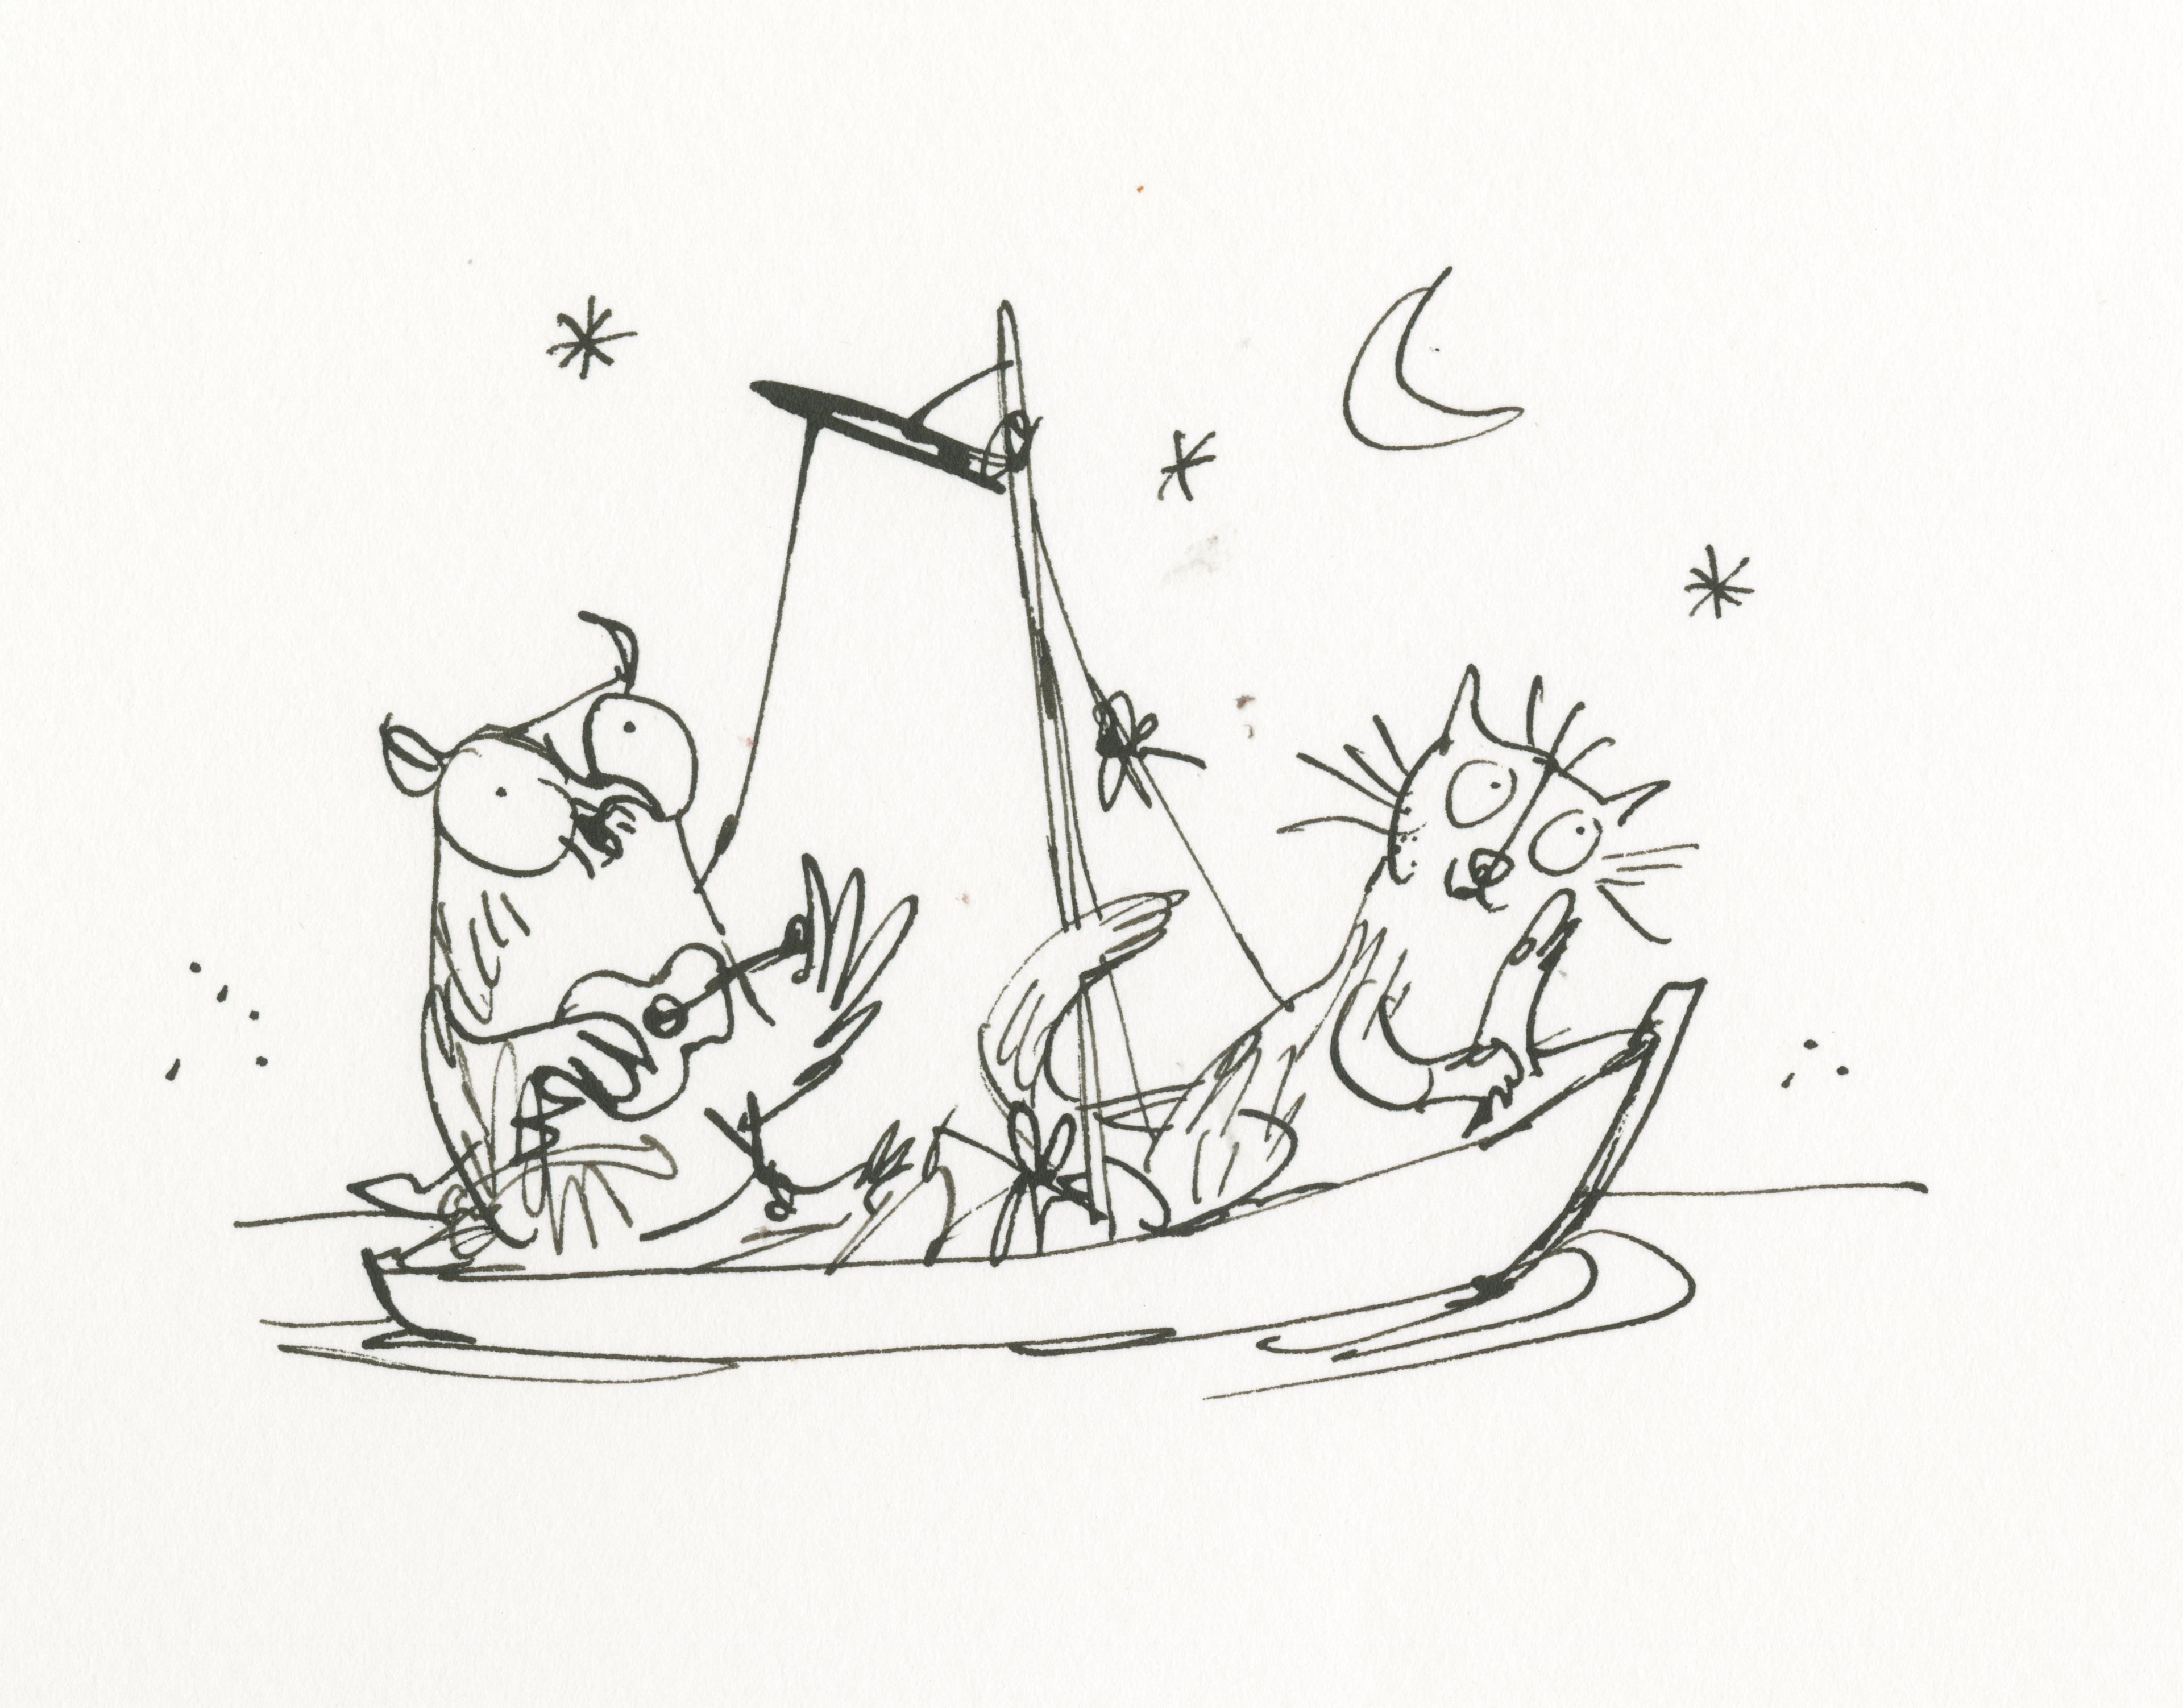 Illustration of an owl and a cat sitting in a small boat with sails, there are some ripples in the water around the boat. Some stars and the moon are in the background. The owl is playing a small guitar, and the cat is looking into the distance with its head resting on one of its paws. 